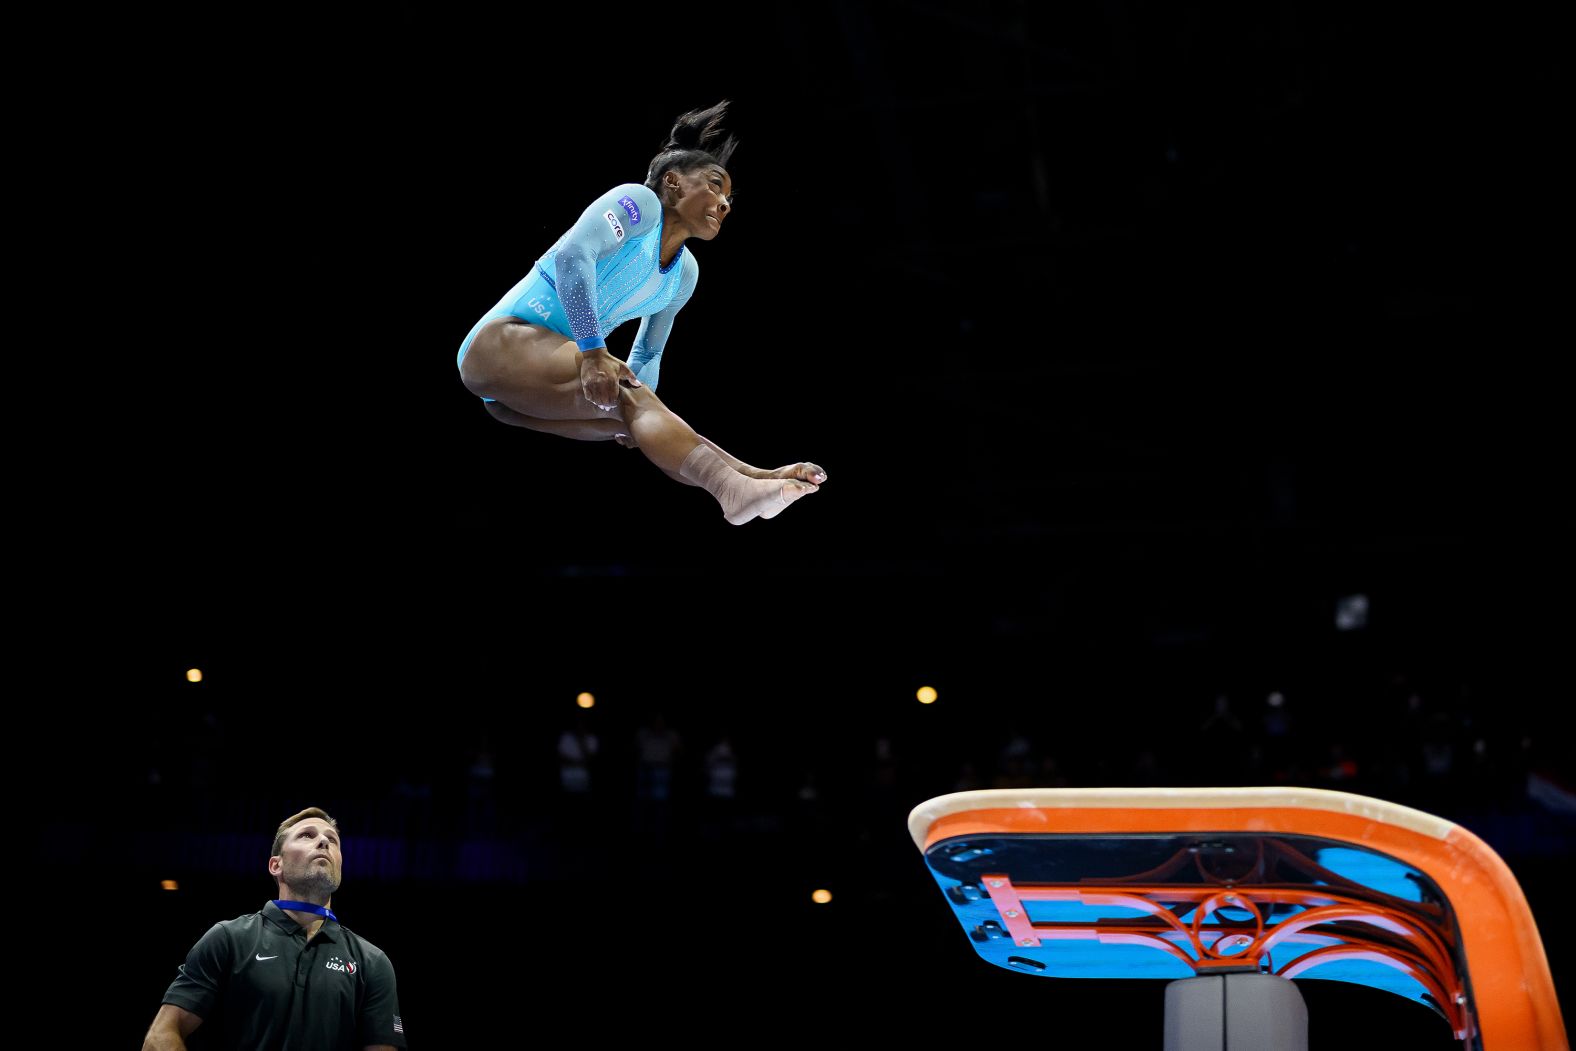 Biles lands a Yurchenko double pike vault — a high-difficulty skill historically only done by men — while qualifying for the women's all-around competition at the World Artistic Gymnastics Championships in October 2023. It was <a href="index.php?page=&url=https%3A%2F%2Fwww.cnn.com%2F2023%2F10%2F01%2Fsport%2Fsimone-biles-world-gymnastics-championships-qualifying-spt-intl%2Findex.html" target="_blank">the first time a woman landed the move in an international competition</a>.